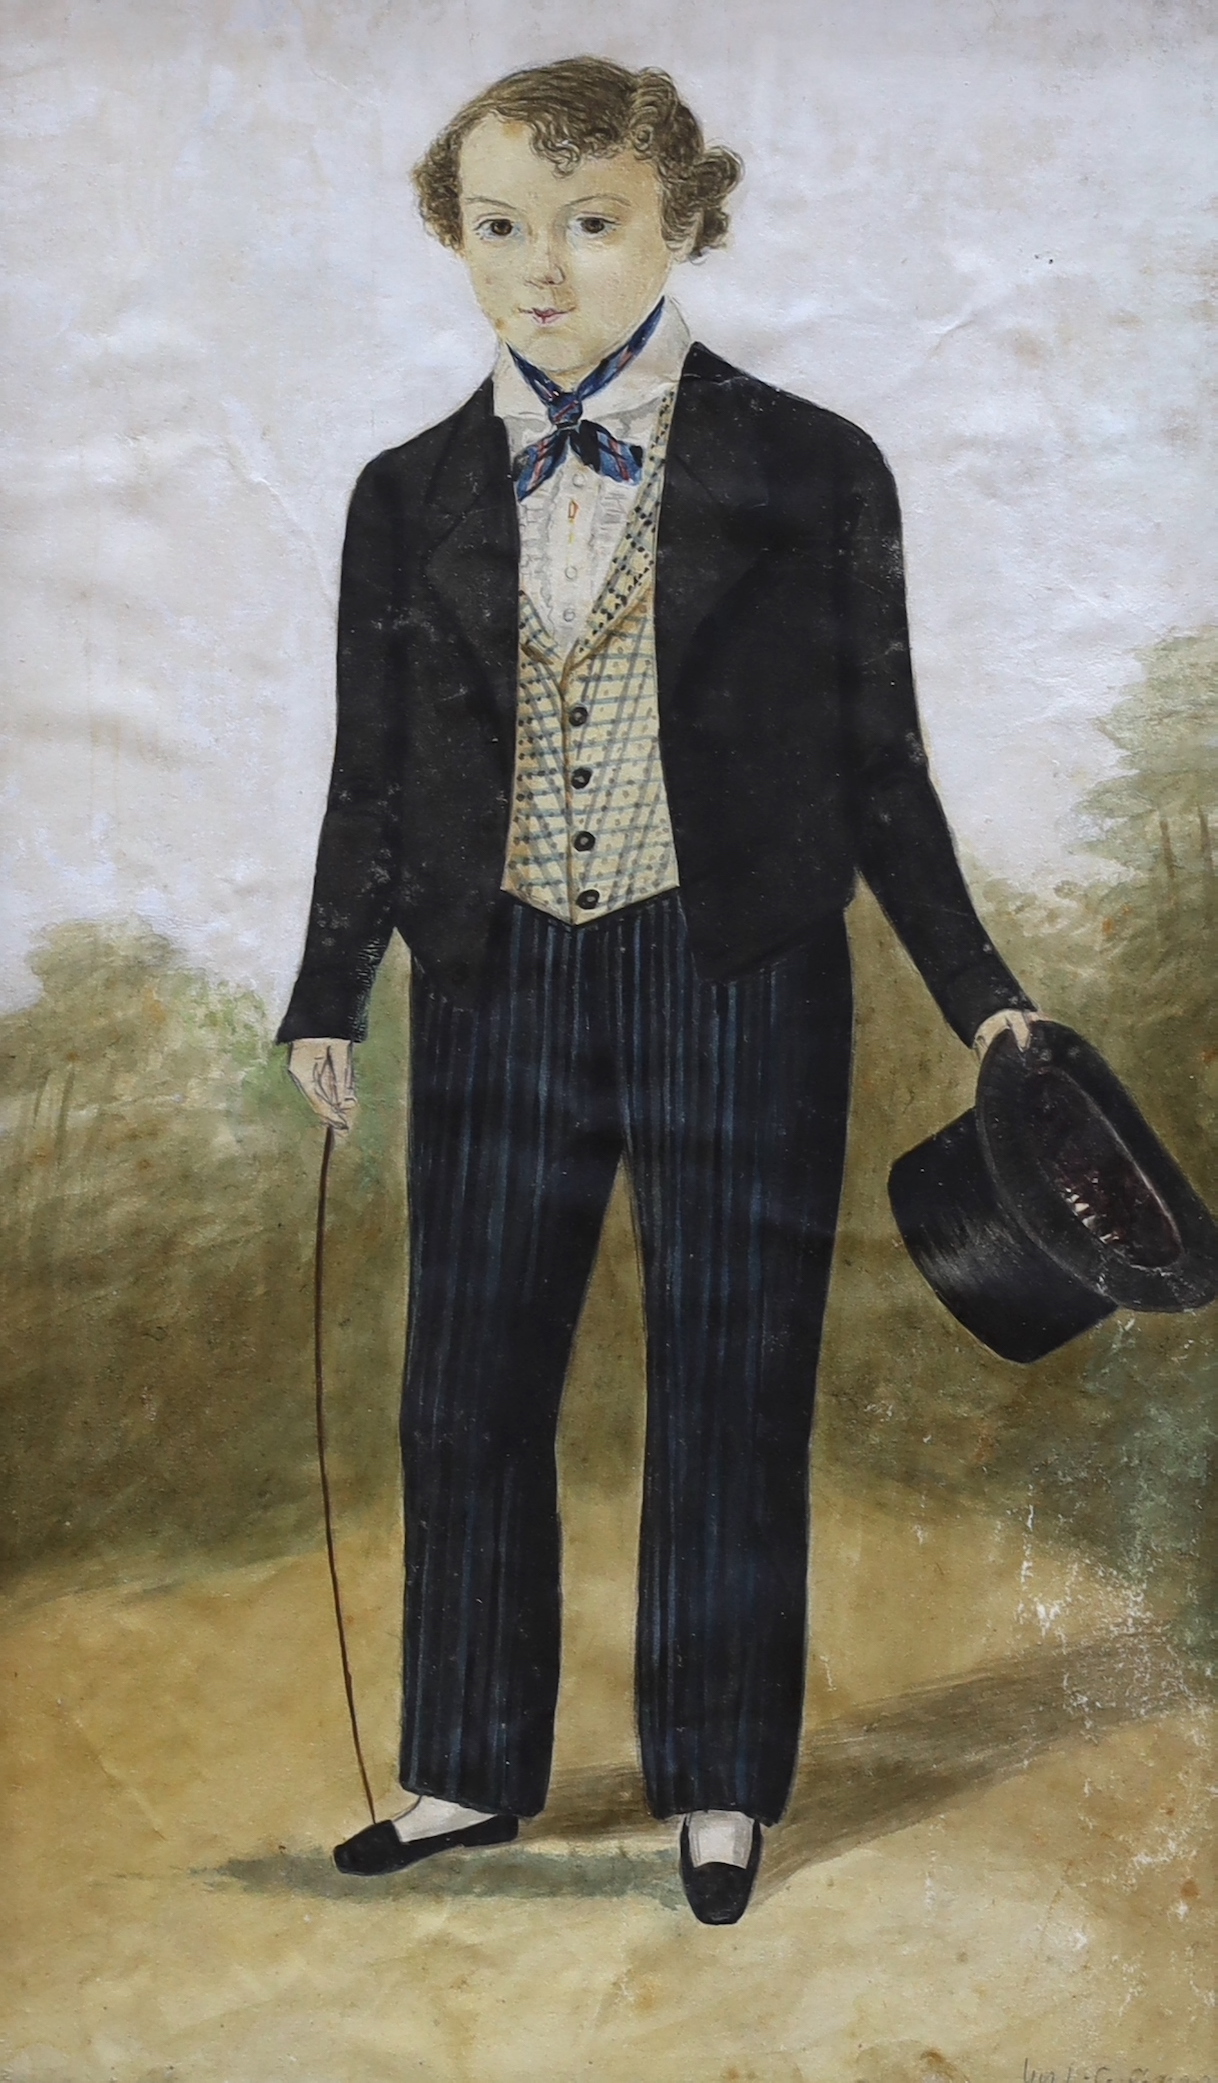 Early 19th century watercolour, Full length portrait of a young man, indistinctly signed, possibly I C Green, maple framed, 26cm x 16cm